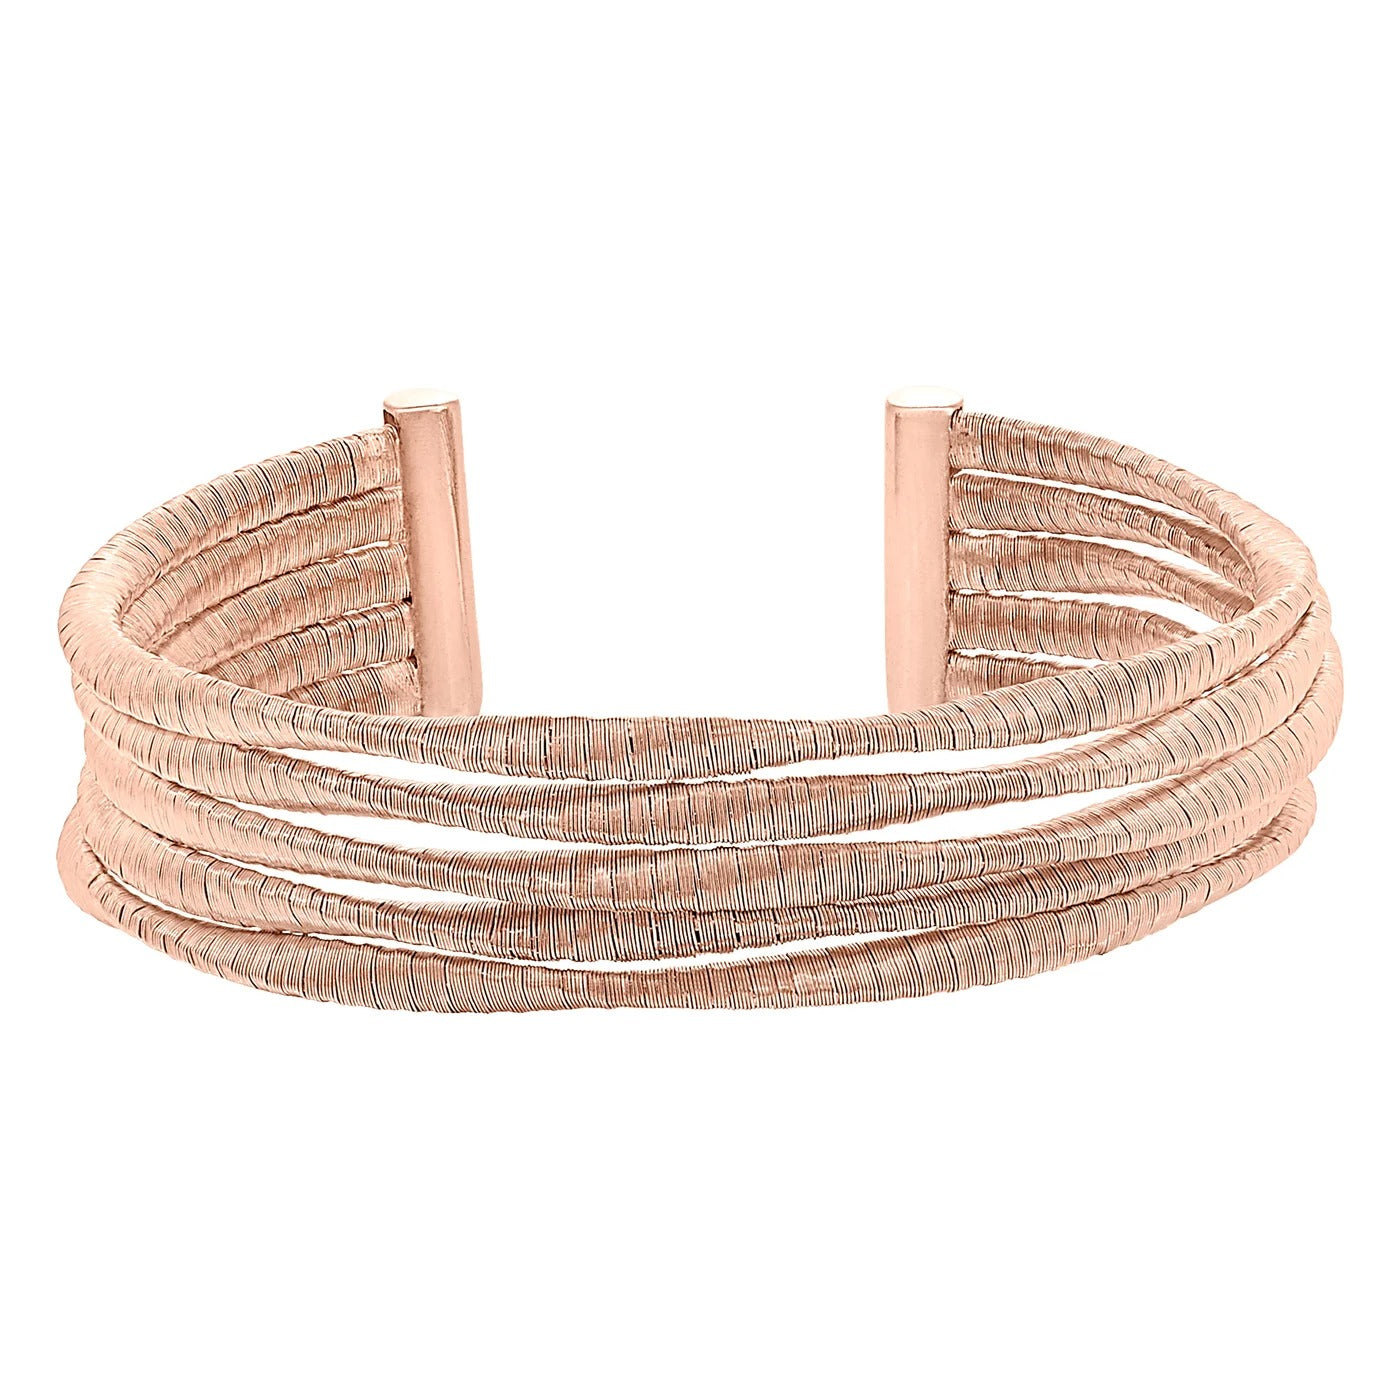 A layered cable sterling silver women's bracelet displayed on a neutral white background.